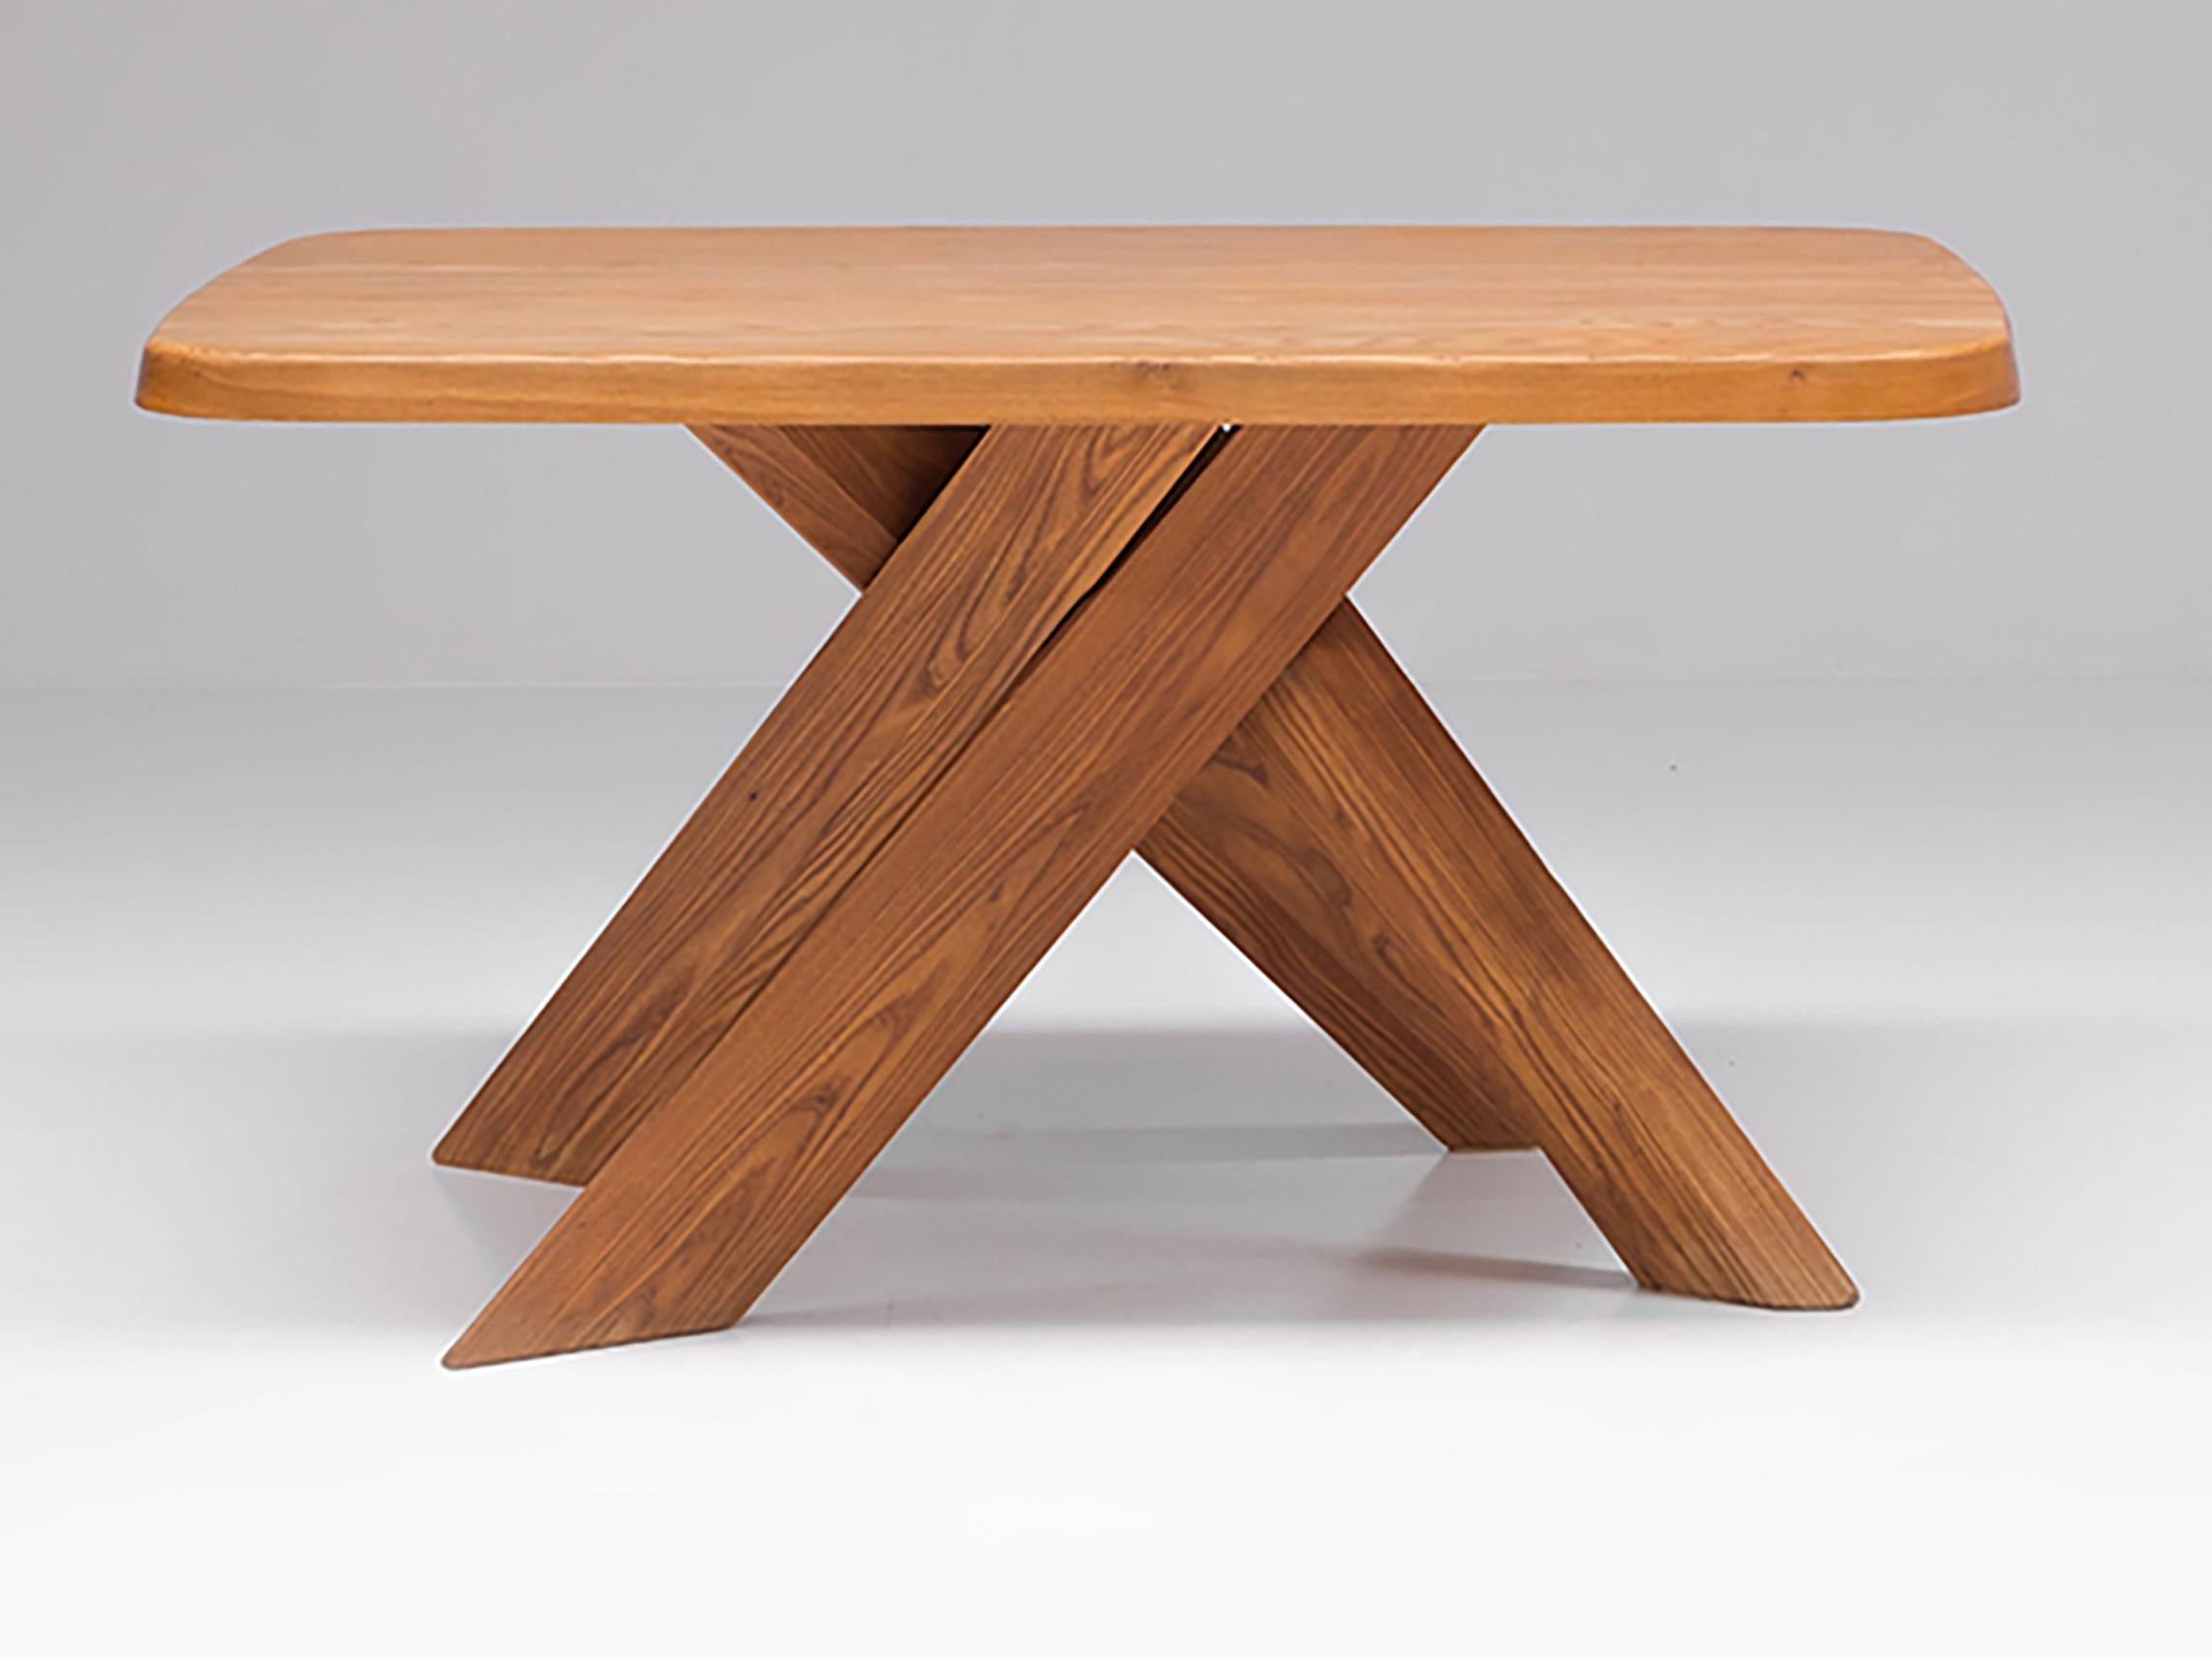 Table T35A - Pierre CHAPO
Elm 
Circa 1970
Dimensions : L127xW85xH73cm
Weight : 50kg
Ref: 4464/6
Price : 12000€ (€)

A curved top, a central base with four branches, a table perfectly adapted to the dining area. The T 35 is a real